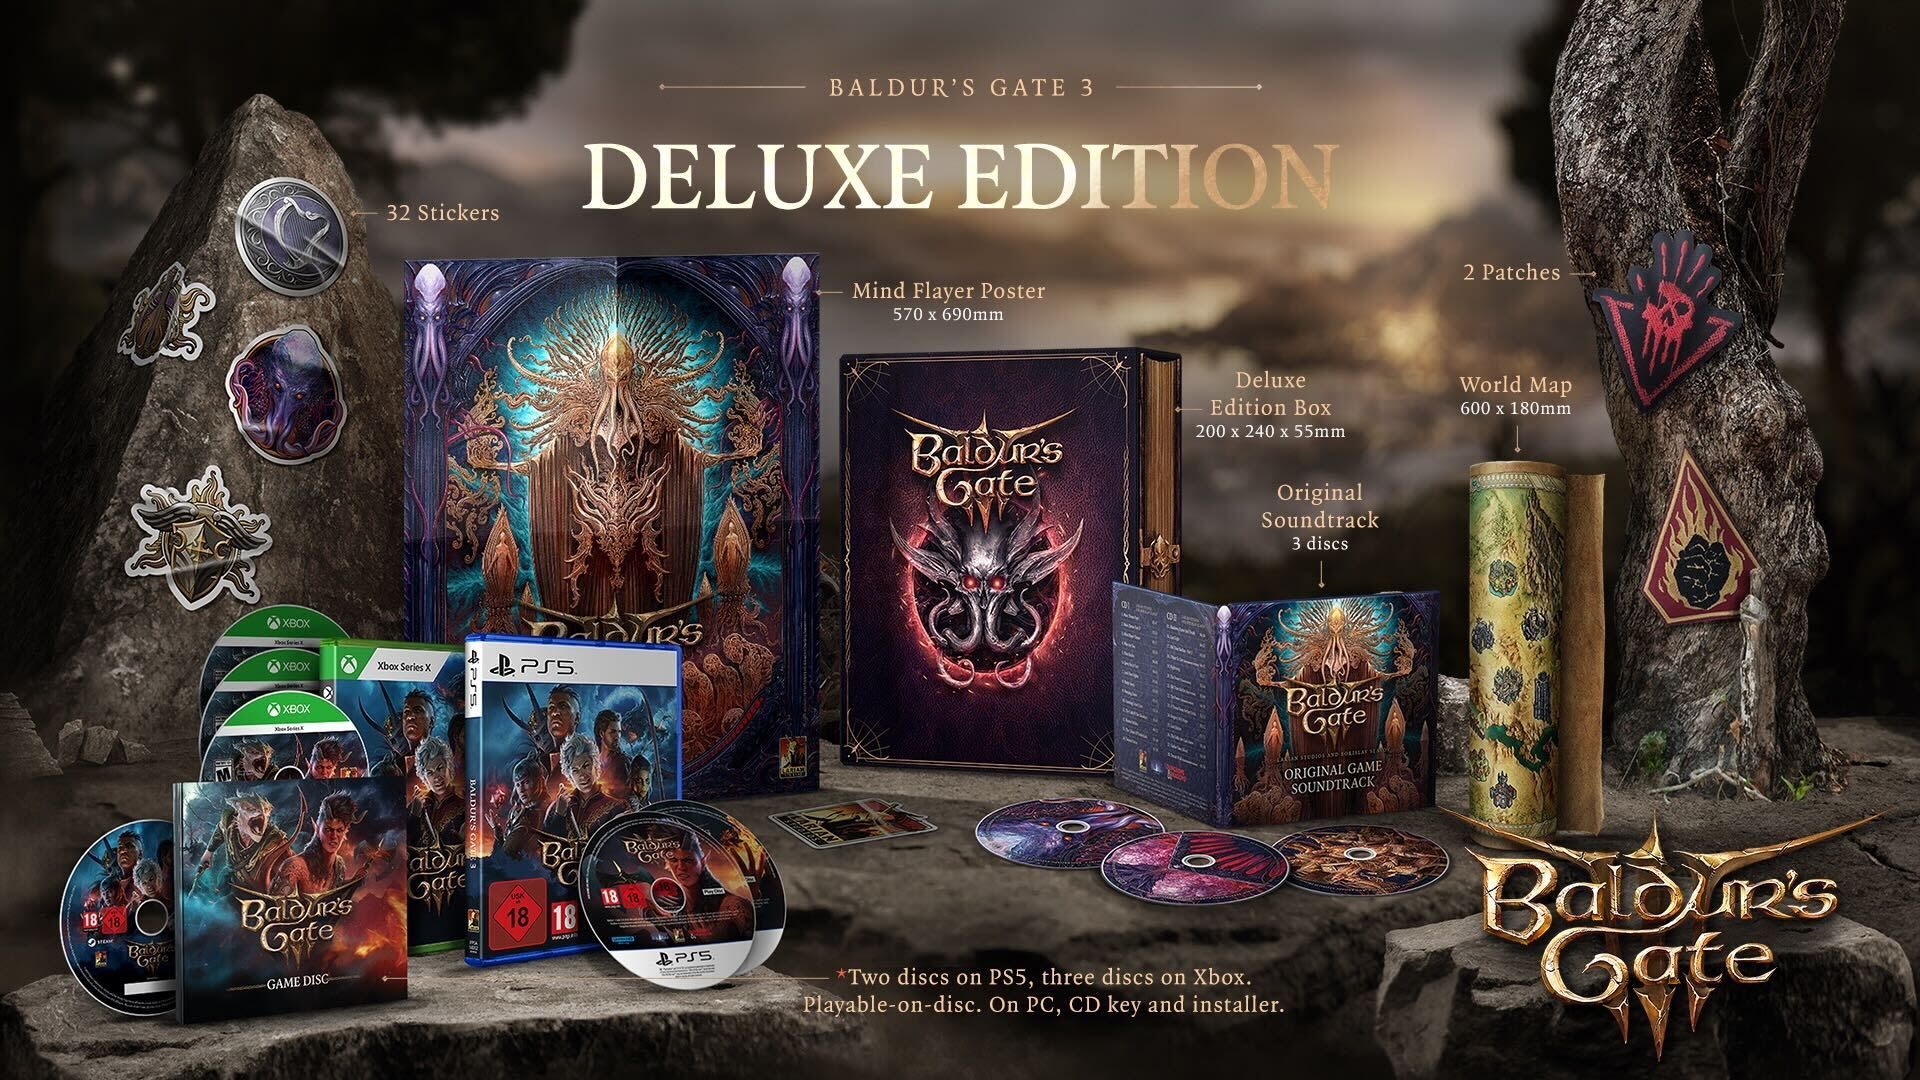 Level Up Your Collection: Baldur’s Gate 3 Deluxe Edition Preorders Now Available